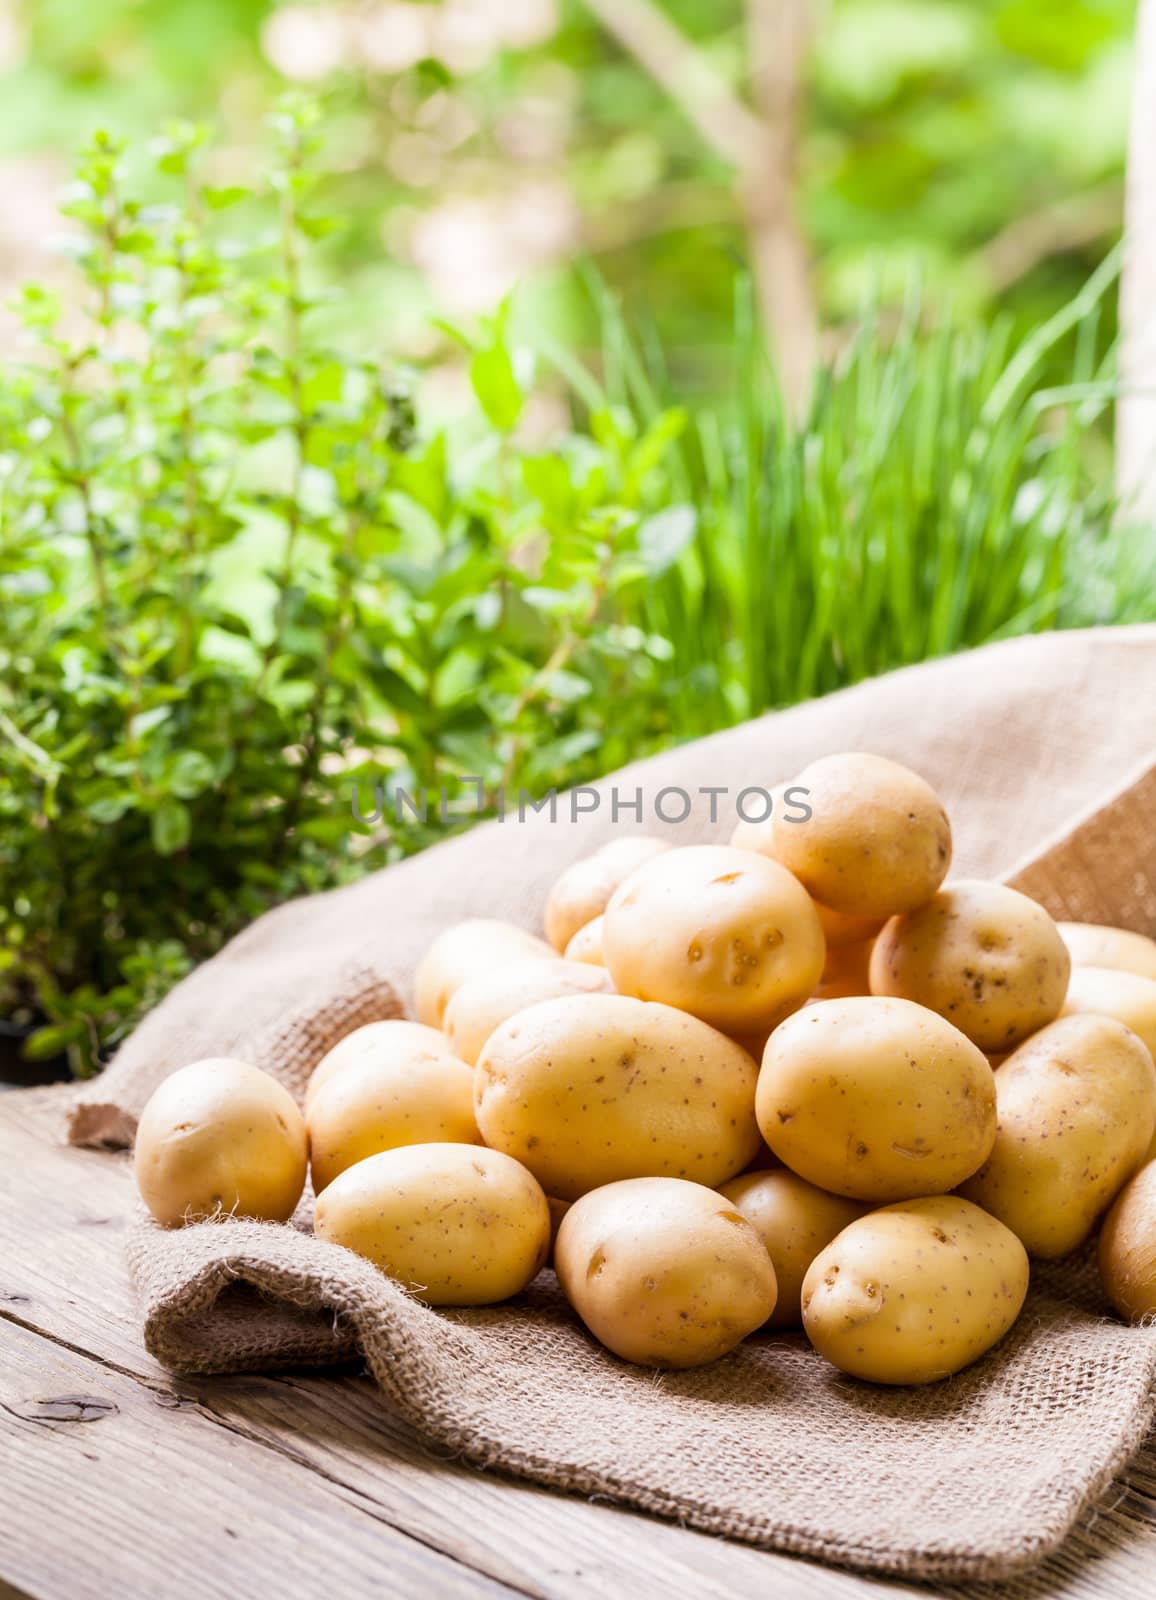 Farm fresh baby potatoes displayed on a hessian sack on a rustic wooden table at farmers market, a healthy nutritious root vegetable popular in vegetarian and vegan cuisine